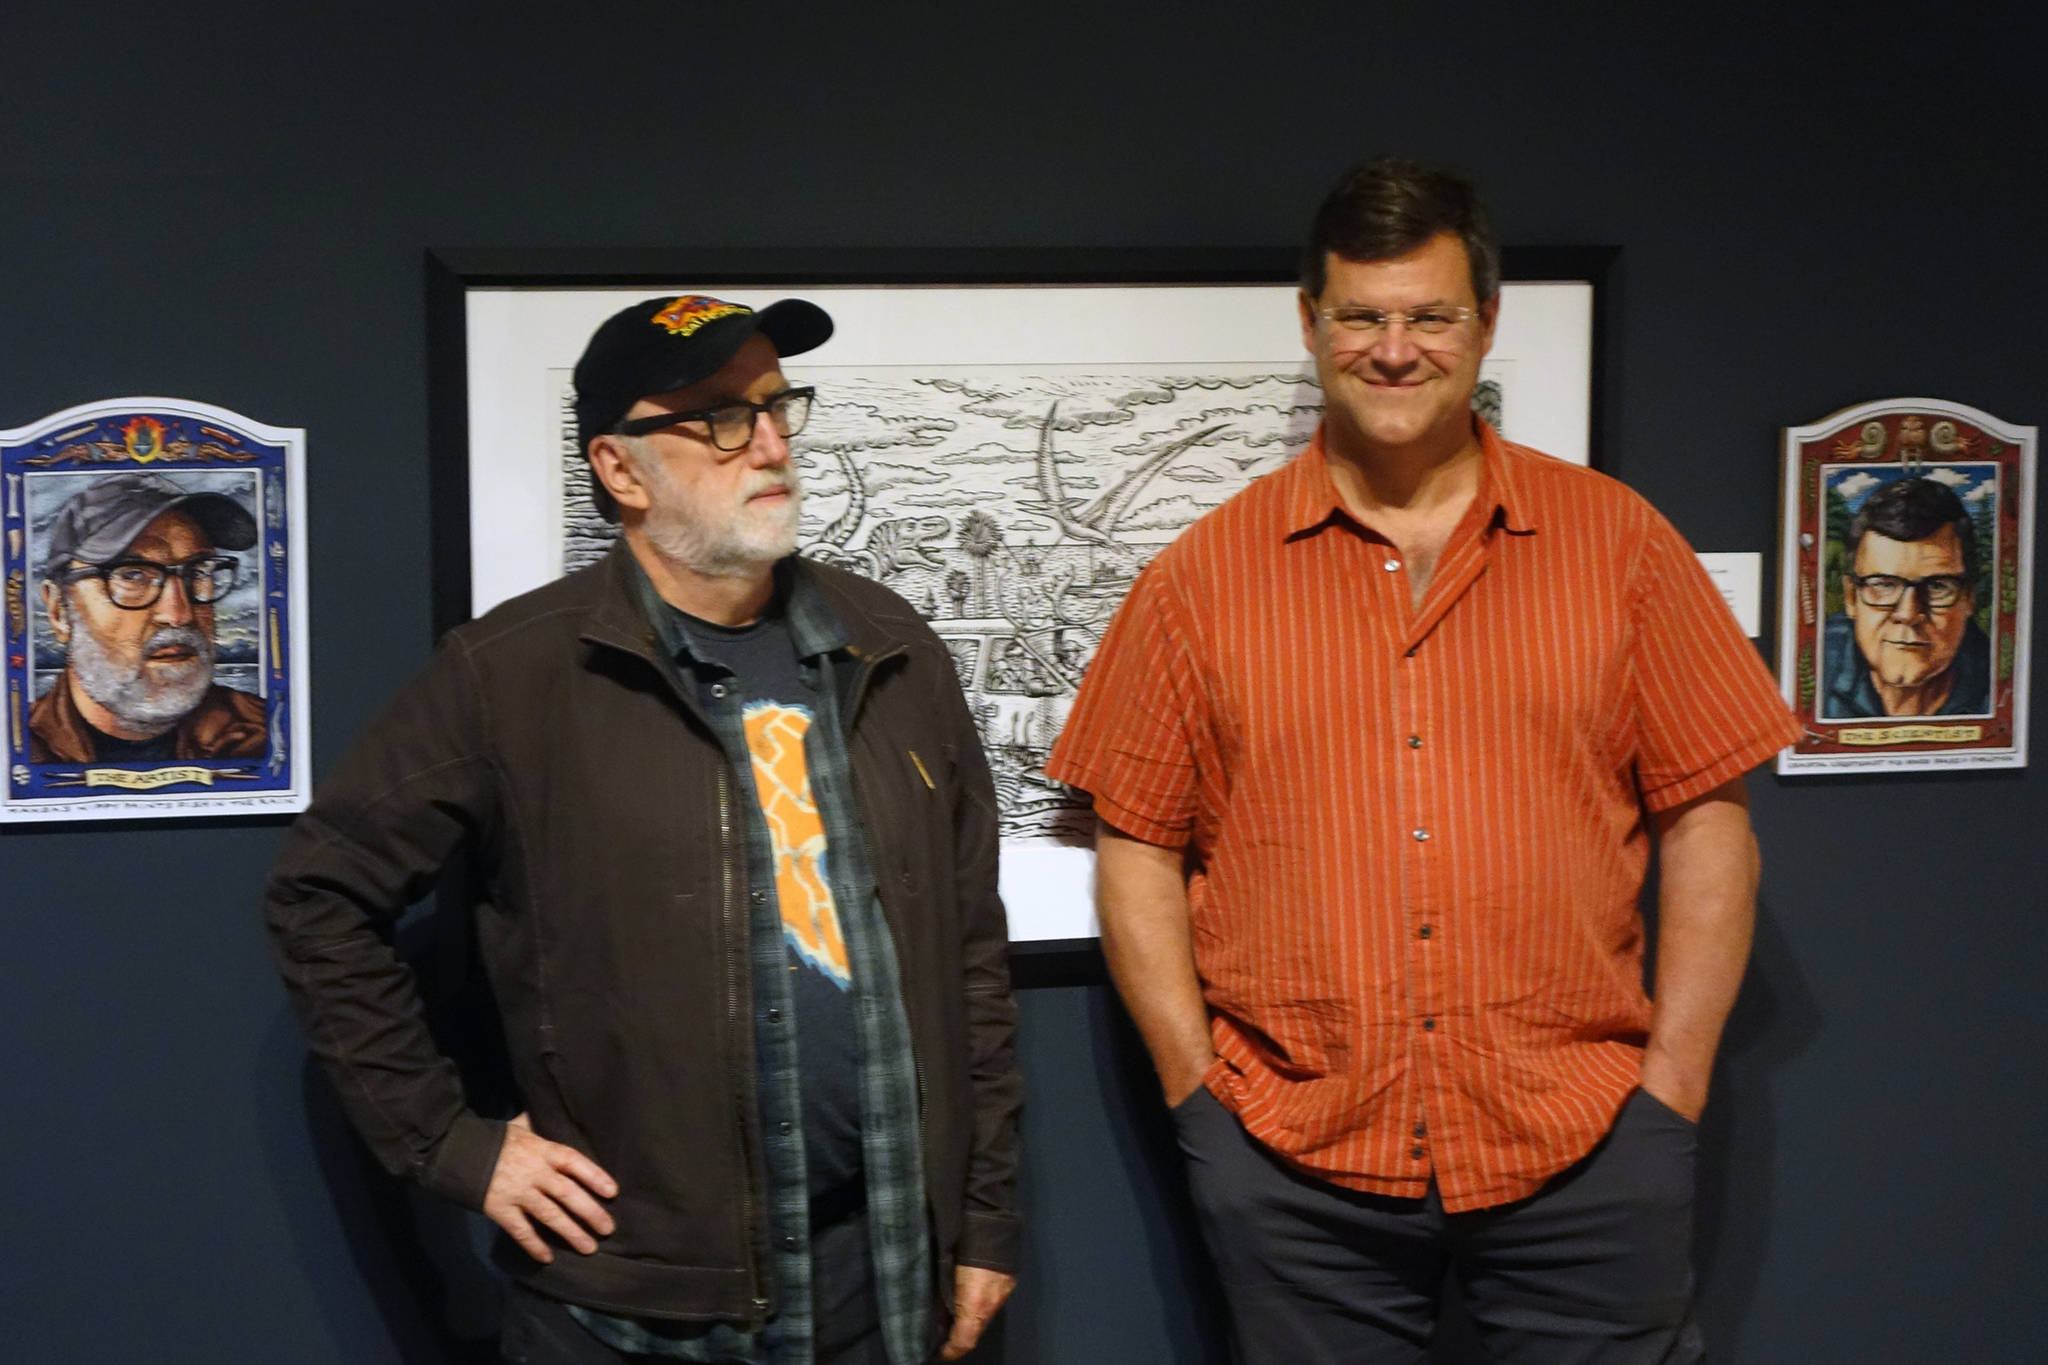 Ketchikan artist Ray Troll and Smithsonian National Museum of Natural History Director Kirk Johnson stand together in the Alaska State Museum near their Troll-drawn portraits. “Cruising’ the Fossil Coastline” is a traveling exhibition inspired by Troll and Johnson’s collaborative book. Johnson was in town Tuesday to talk at the museum. (Ben Hohenstatt | Capital City Weekly)